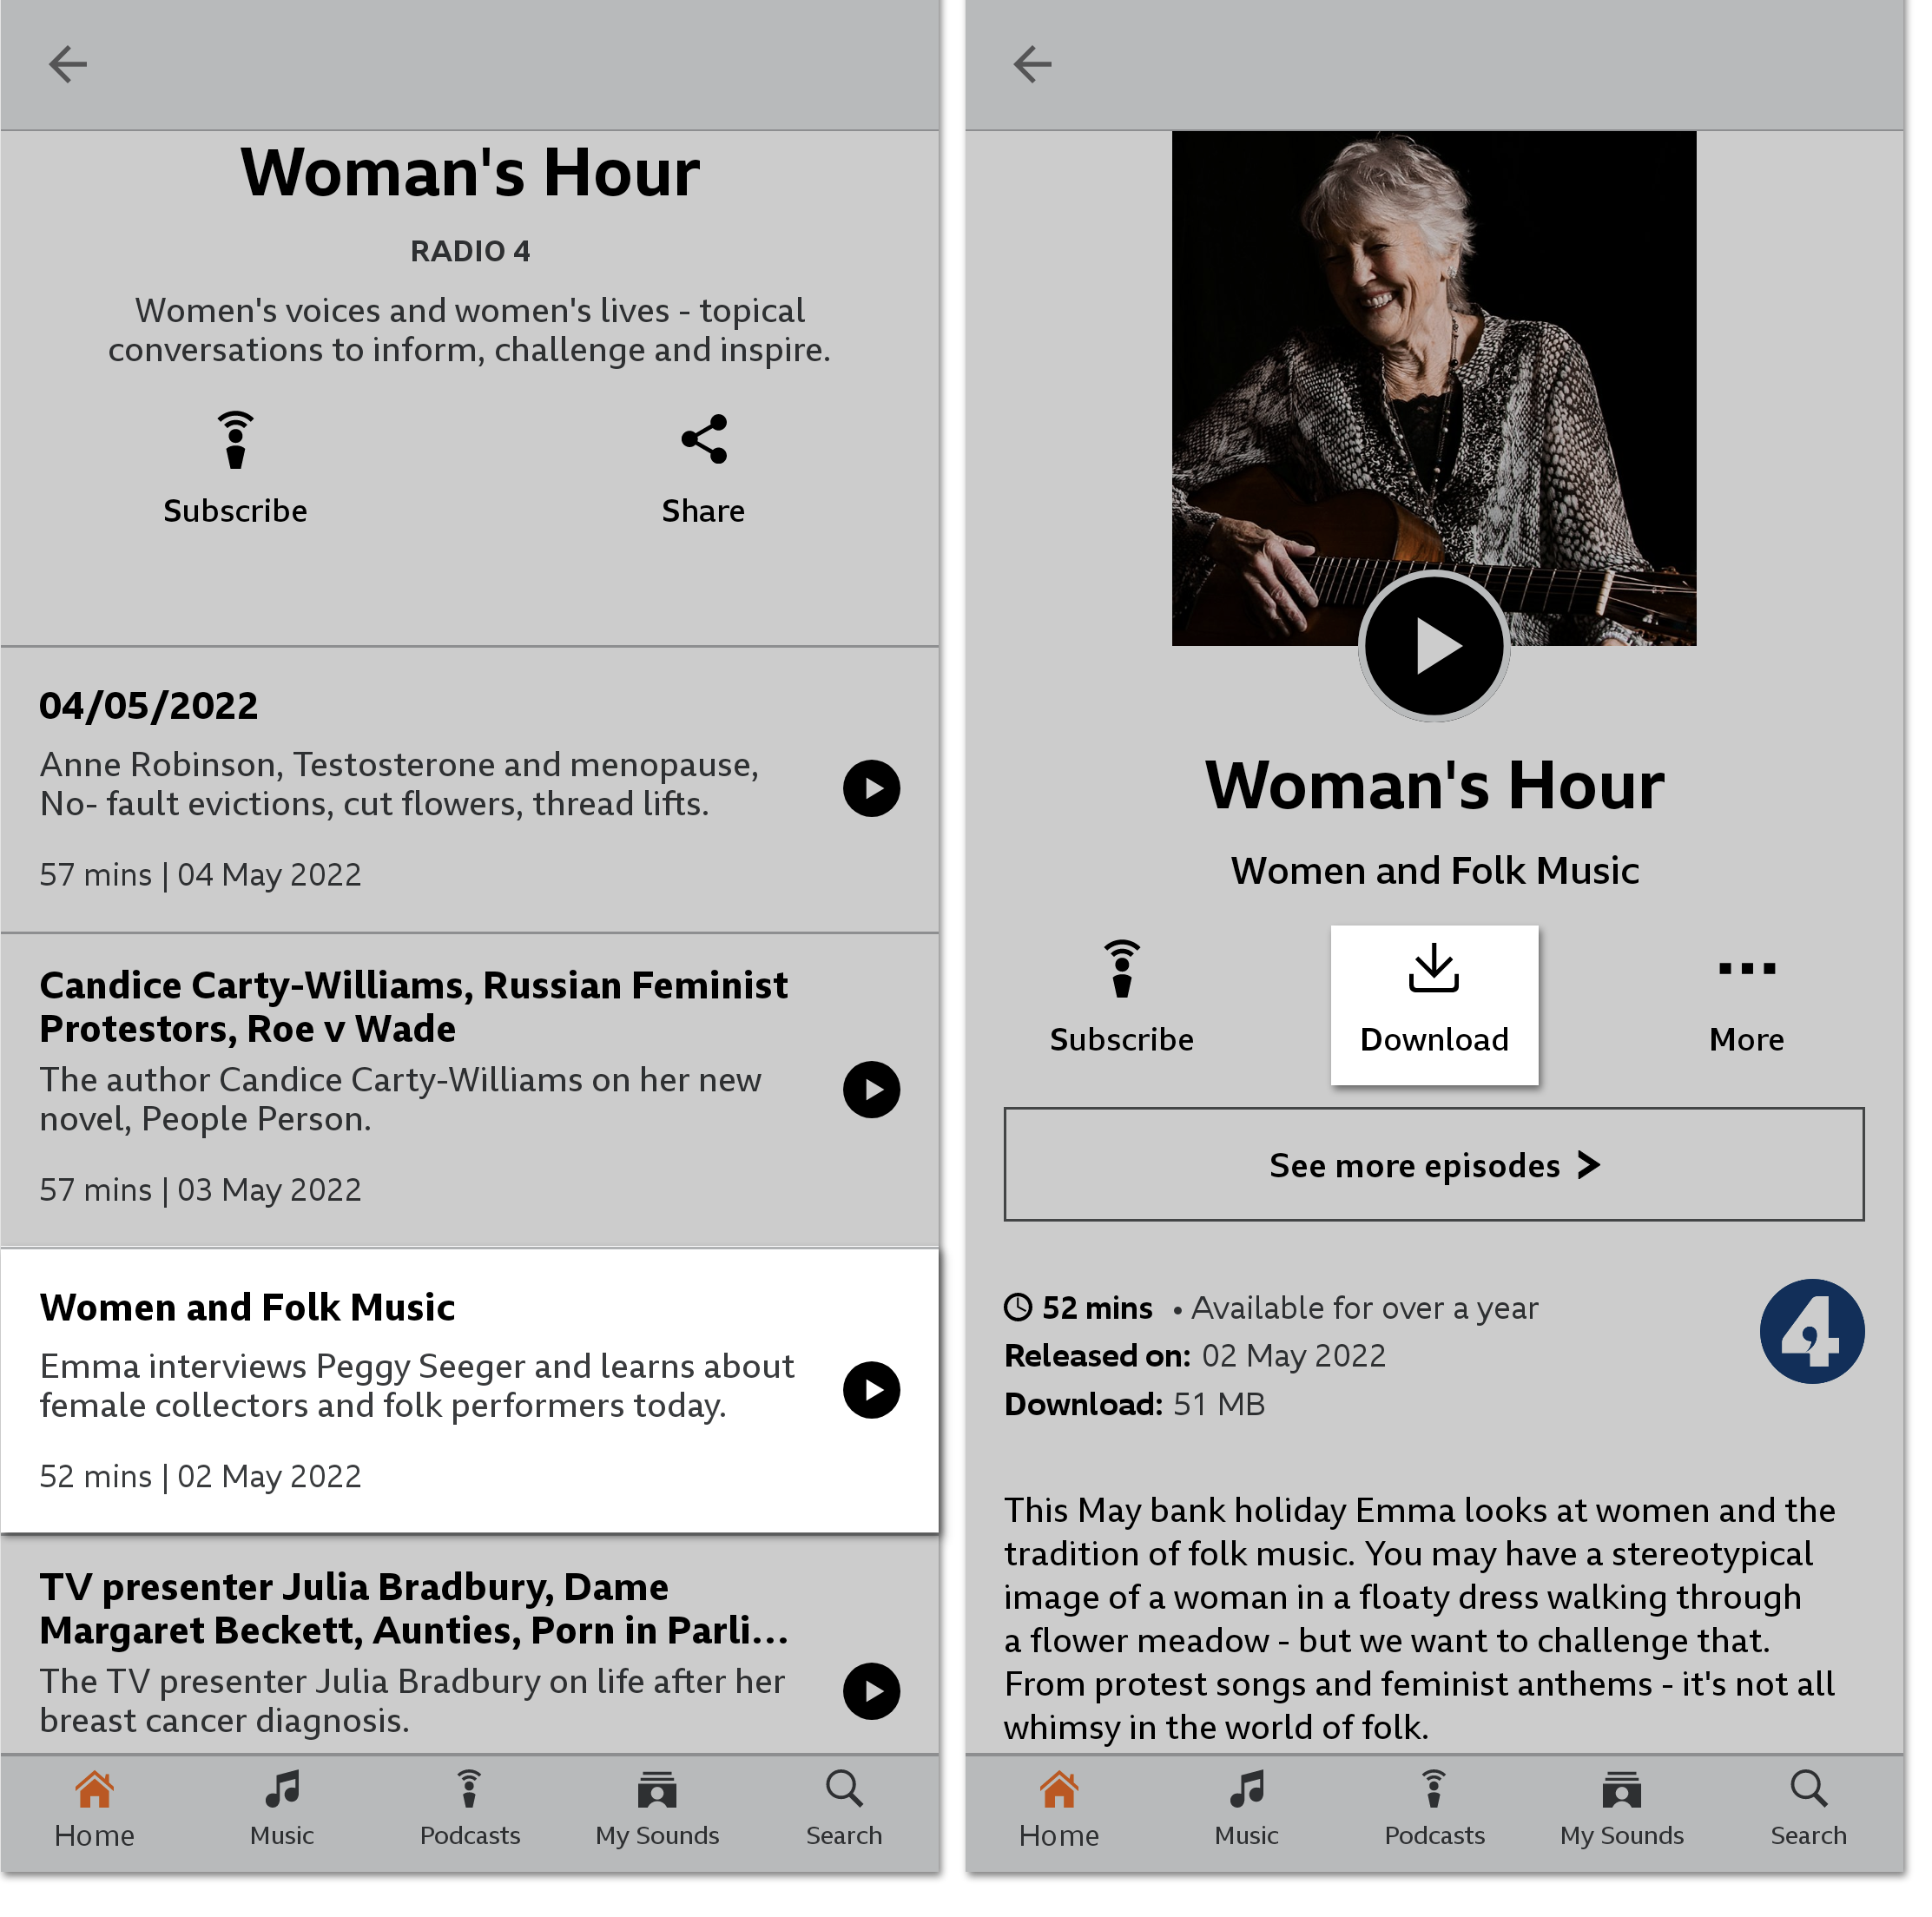 Screenshots of the BBC Sounds mobile app, the first showing available episodes or a programme and the second showing the information on one episode with the download icon highlighted